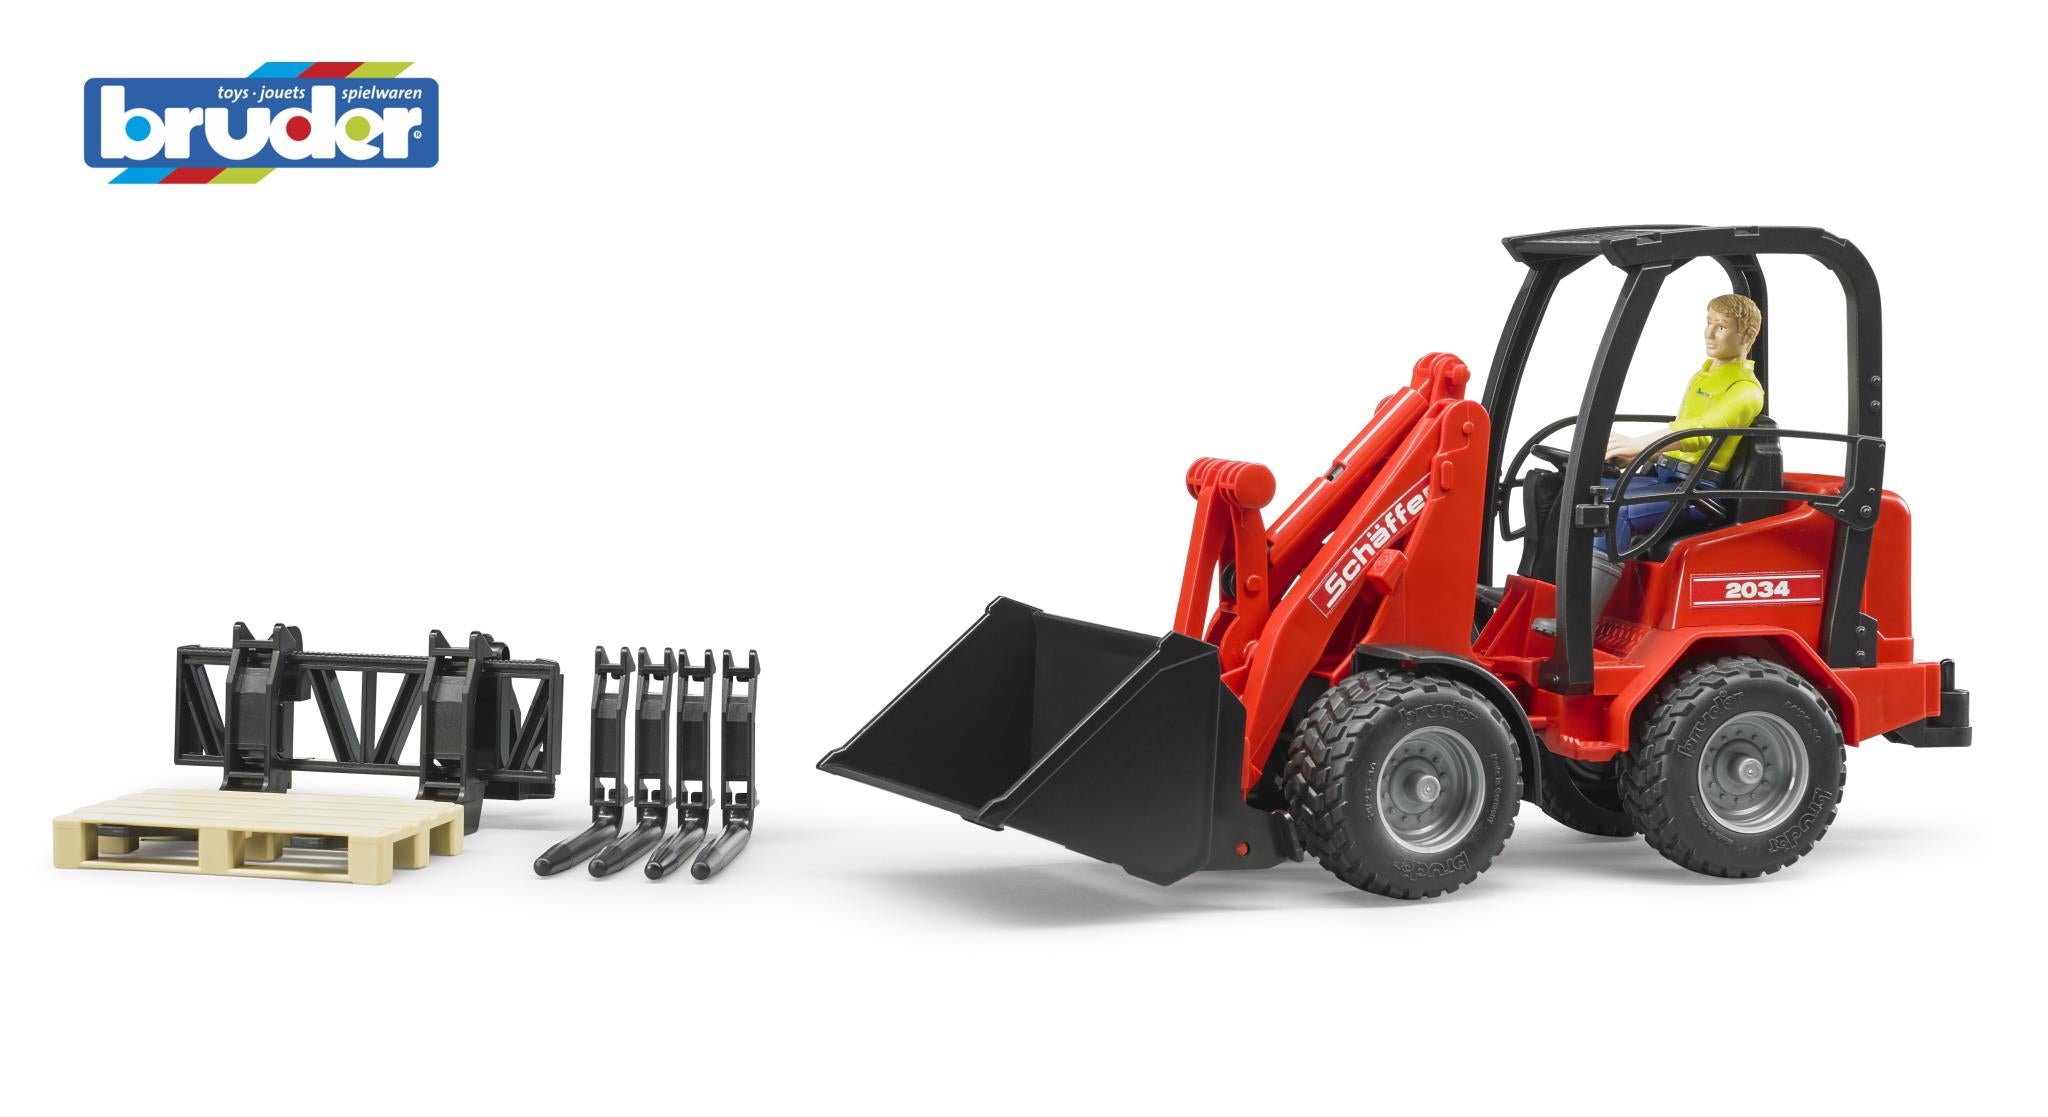 Bruder Compact Loader 2034 With Figure And Access